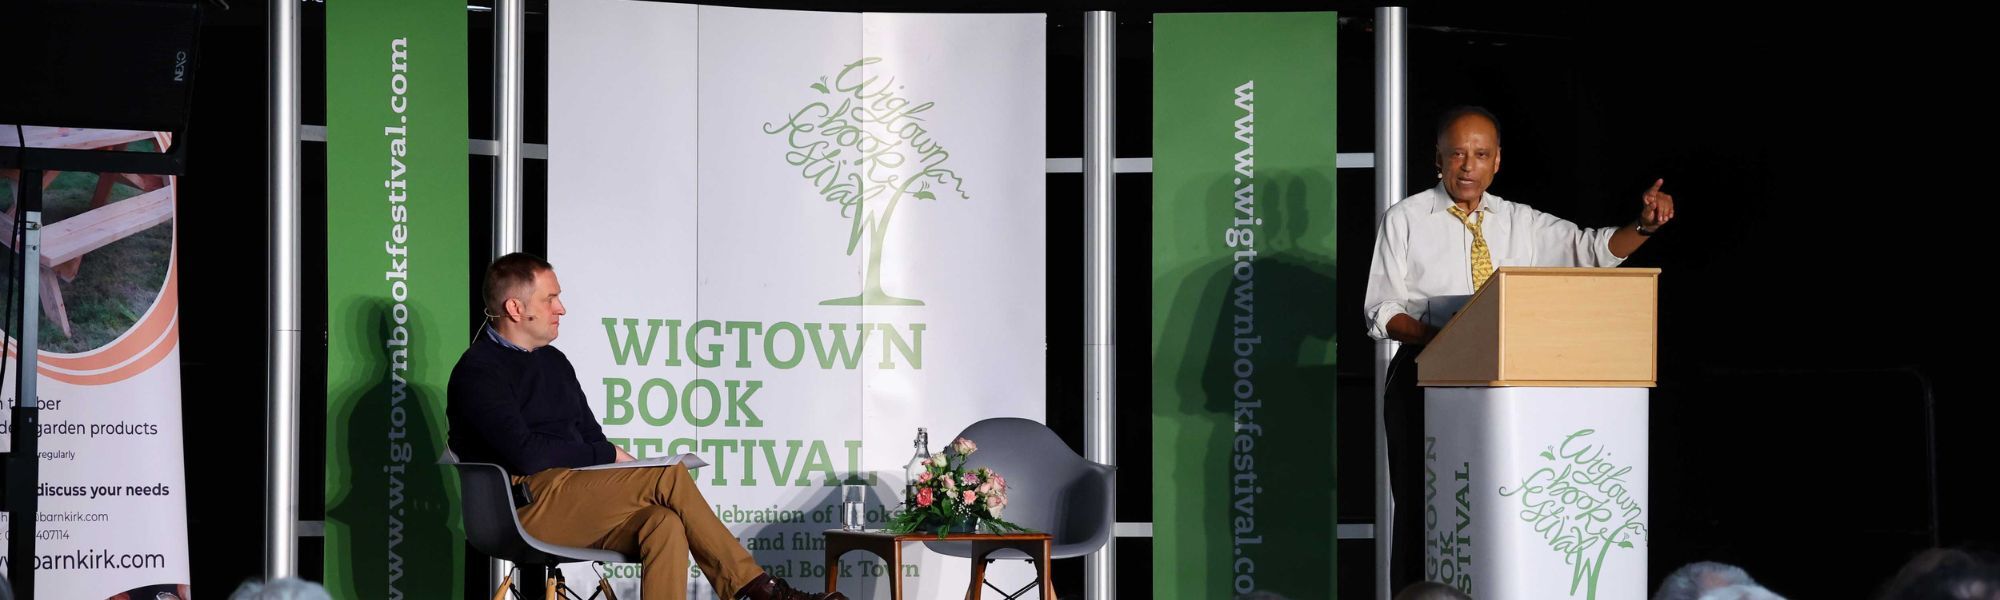 Professor Sir Partha Dasgupta stands on stage at Wigtown Book Festival, speaking behind a lecturn. Chair Graeme Stewart sits at a table nearby. They are both in front of Wigtown Banners.